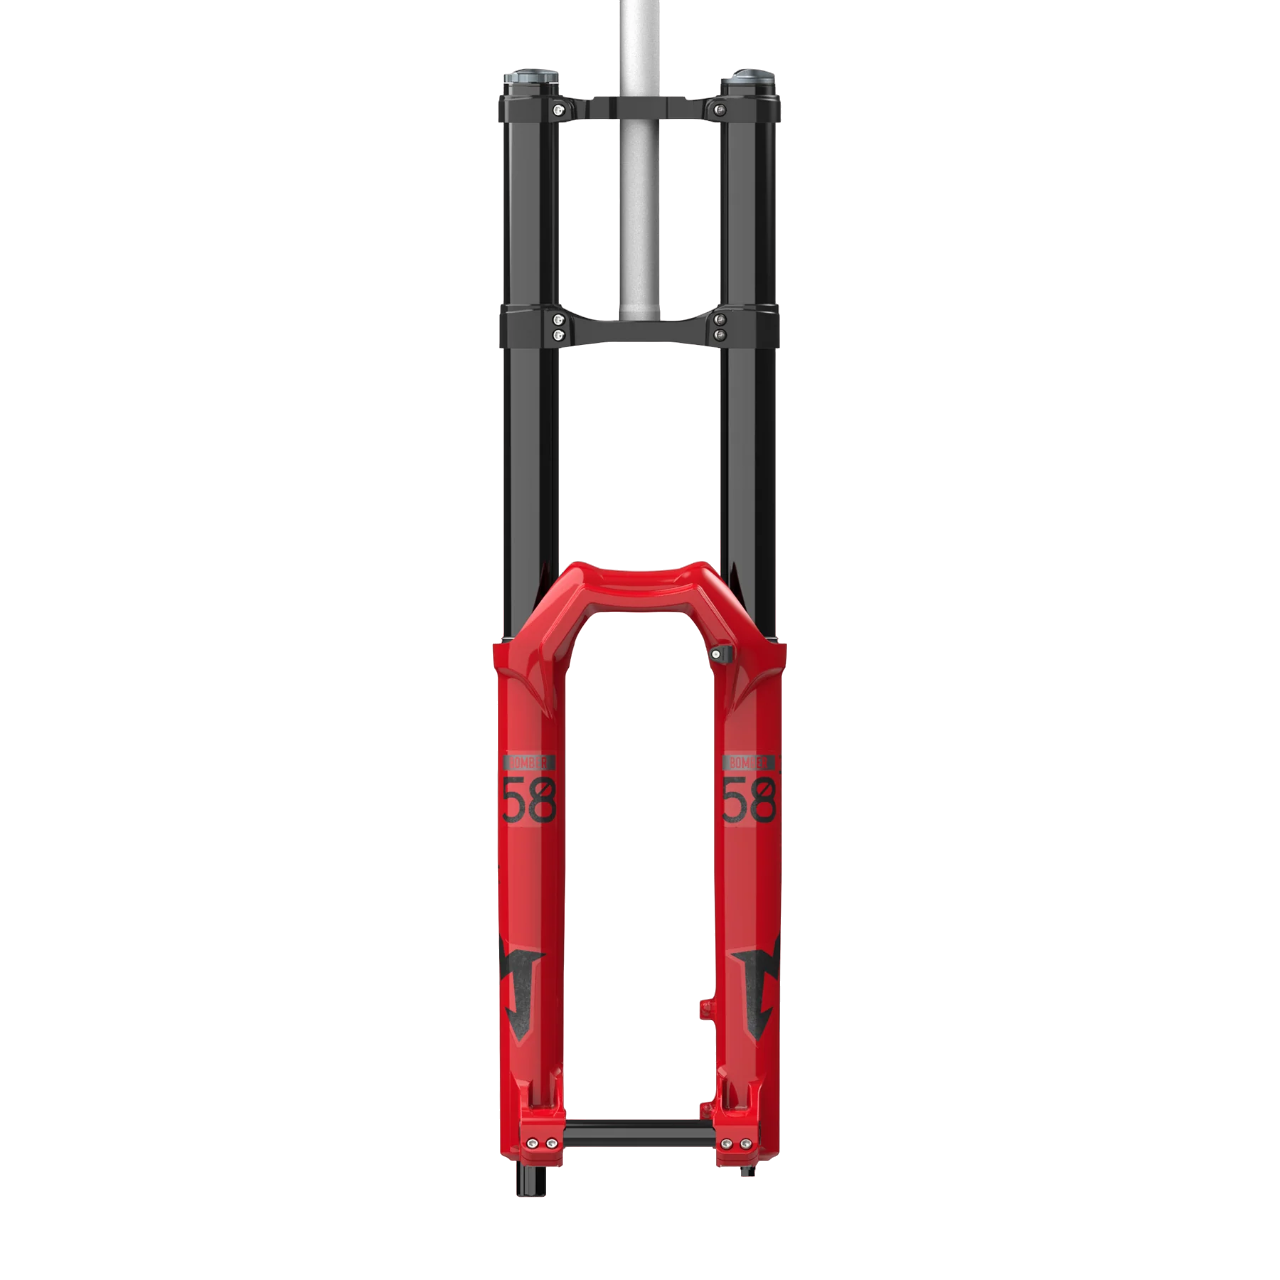 Marzocchi Bomber 58 Fork - 27.5 Inch - 1 1/8th Inch Straight - 20x110mm - 203mm Travel - 51mm - Grip LSC - Gloss Red - 2024